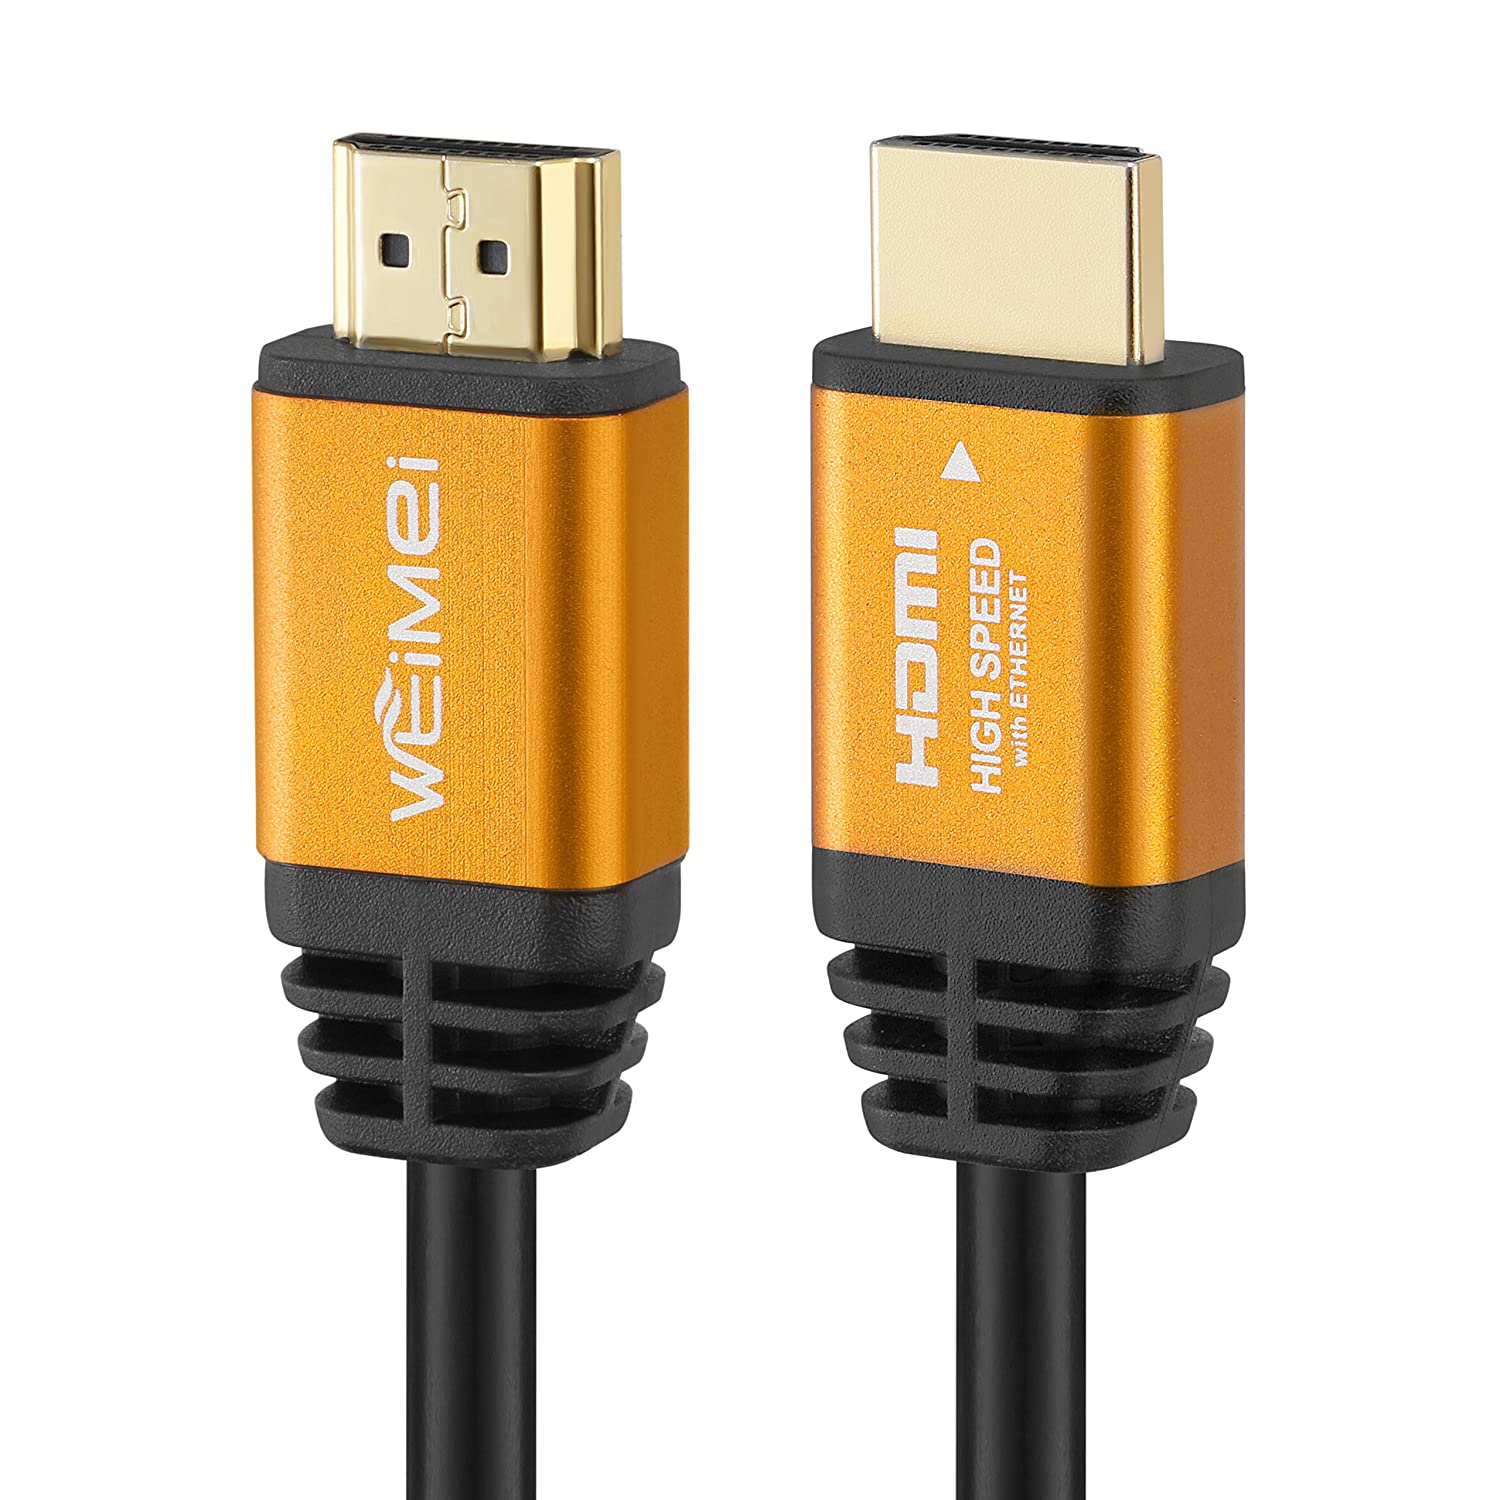  5. WEIMEI 100 Feet 4K HDMI Cable 2.0 